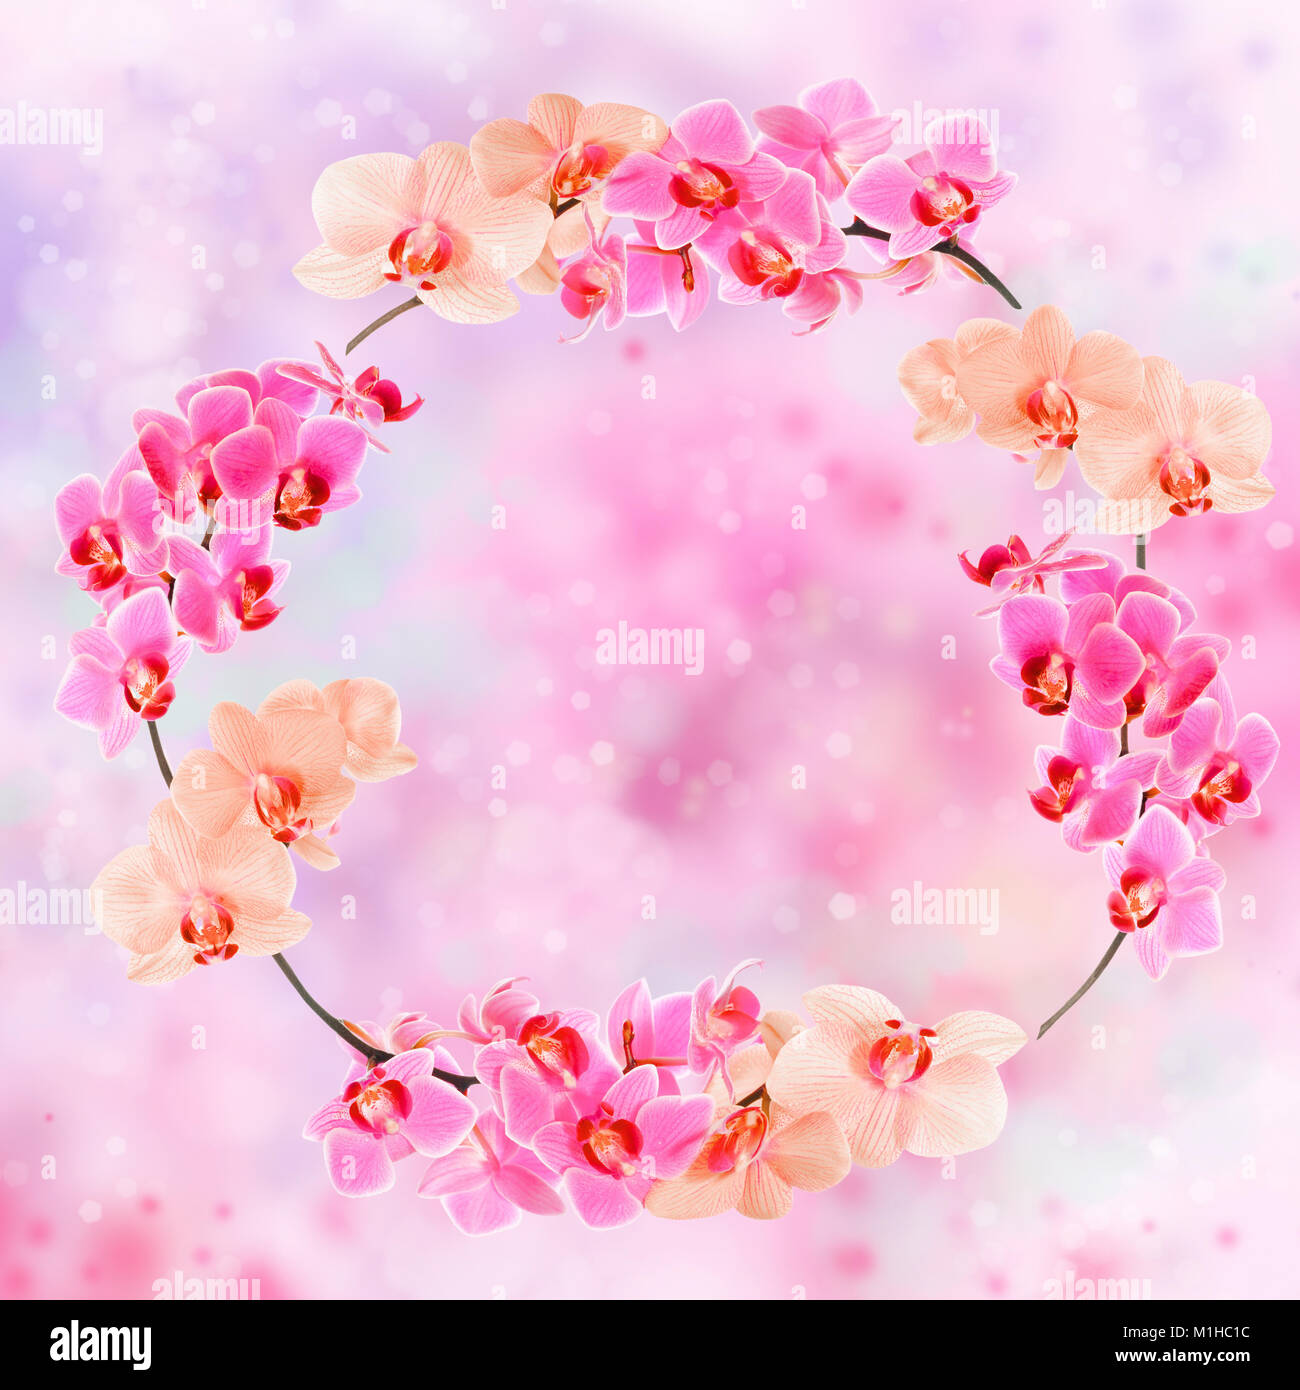 Circle frame made from Phalaenopsis orchids on abstract background, text space Stock Photo